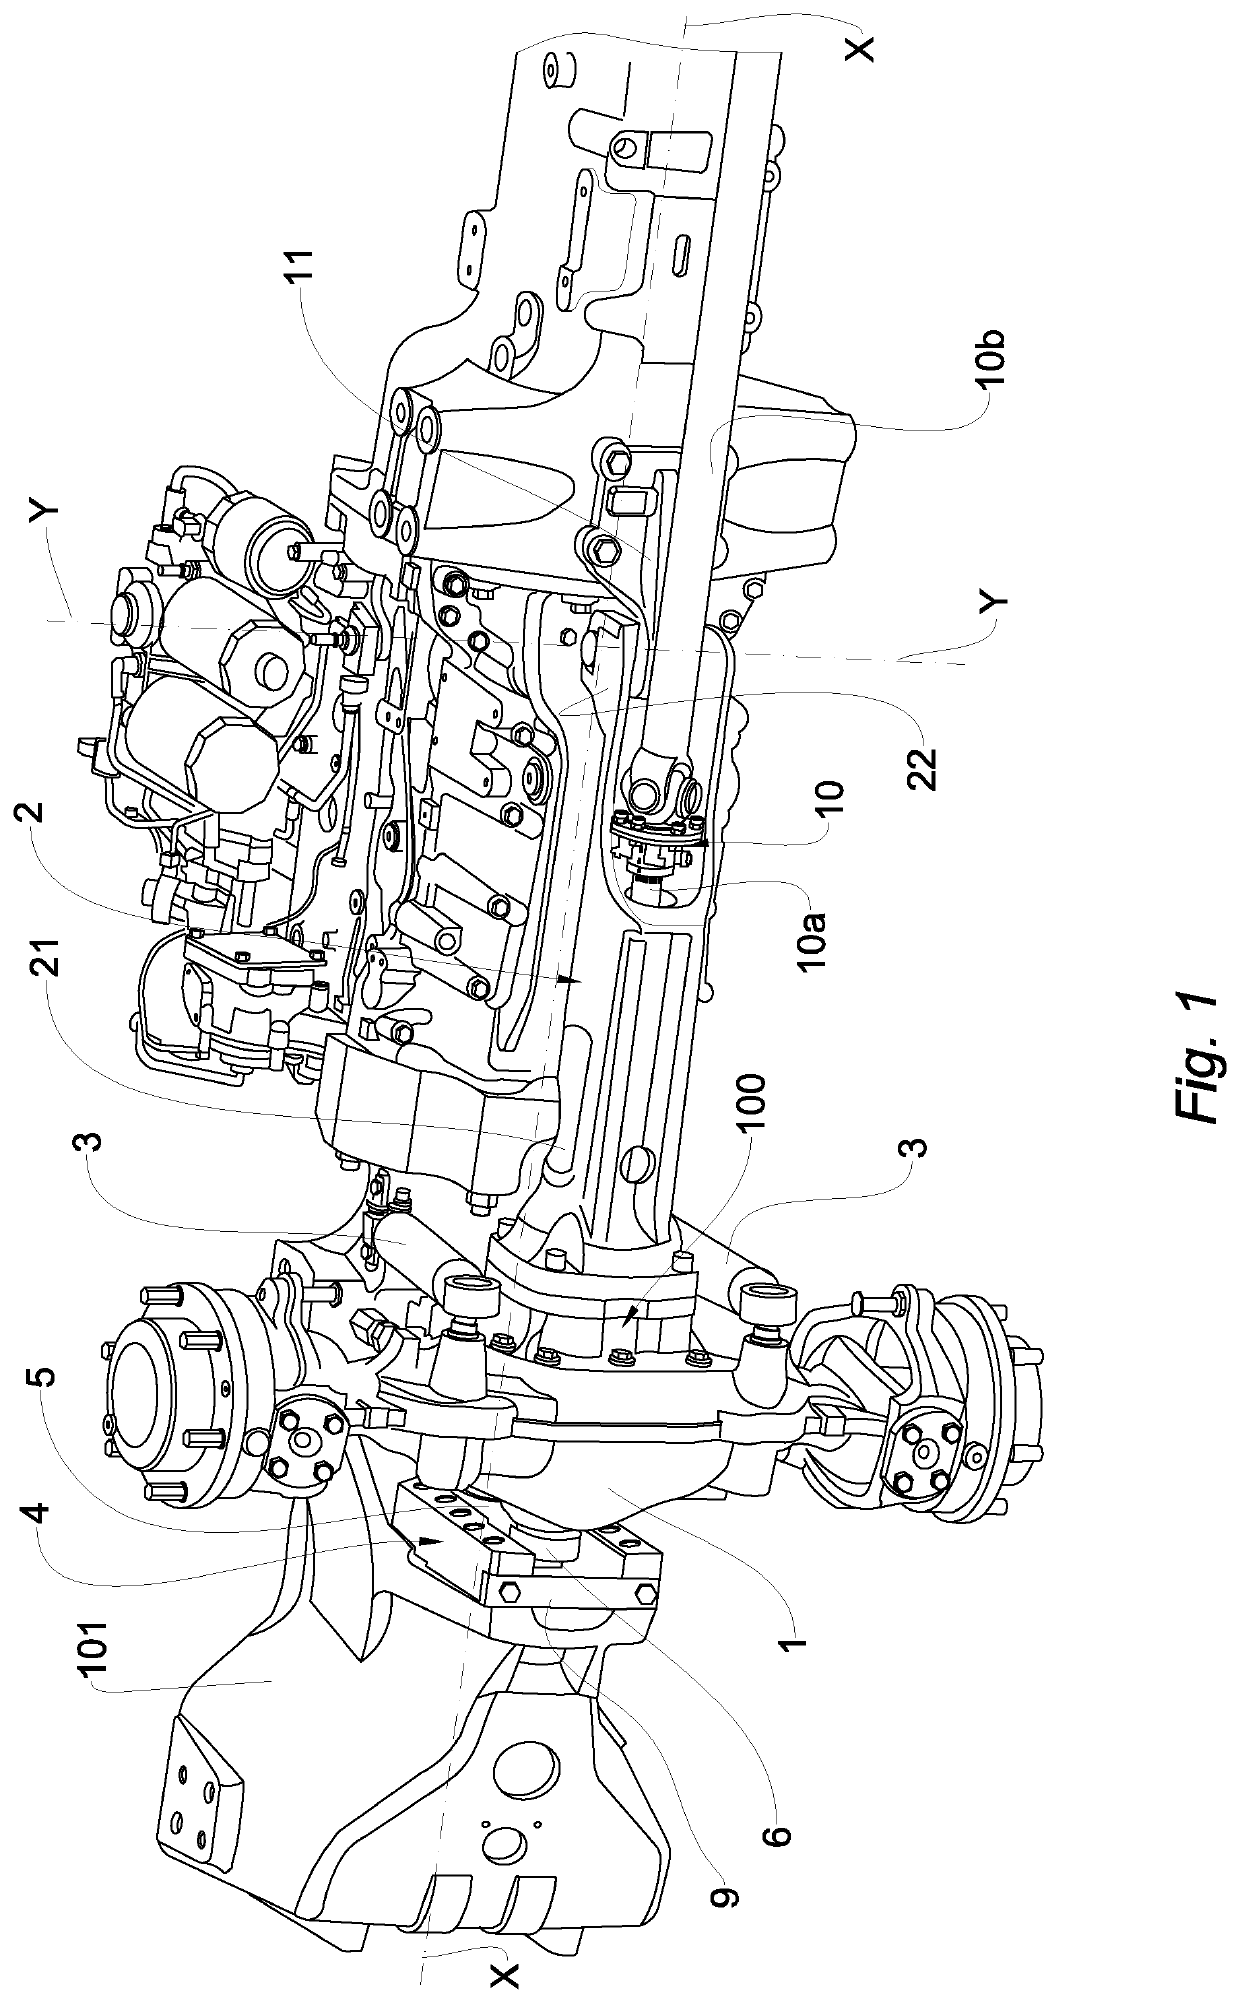 Suspension assembly for a vehicle axle